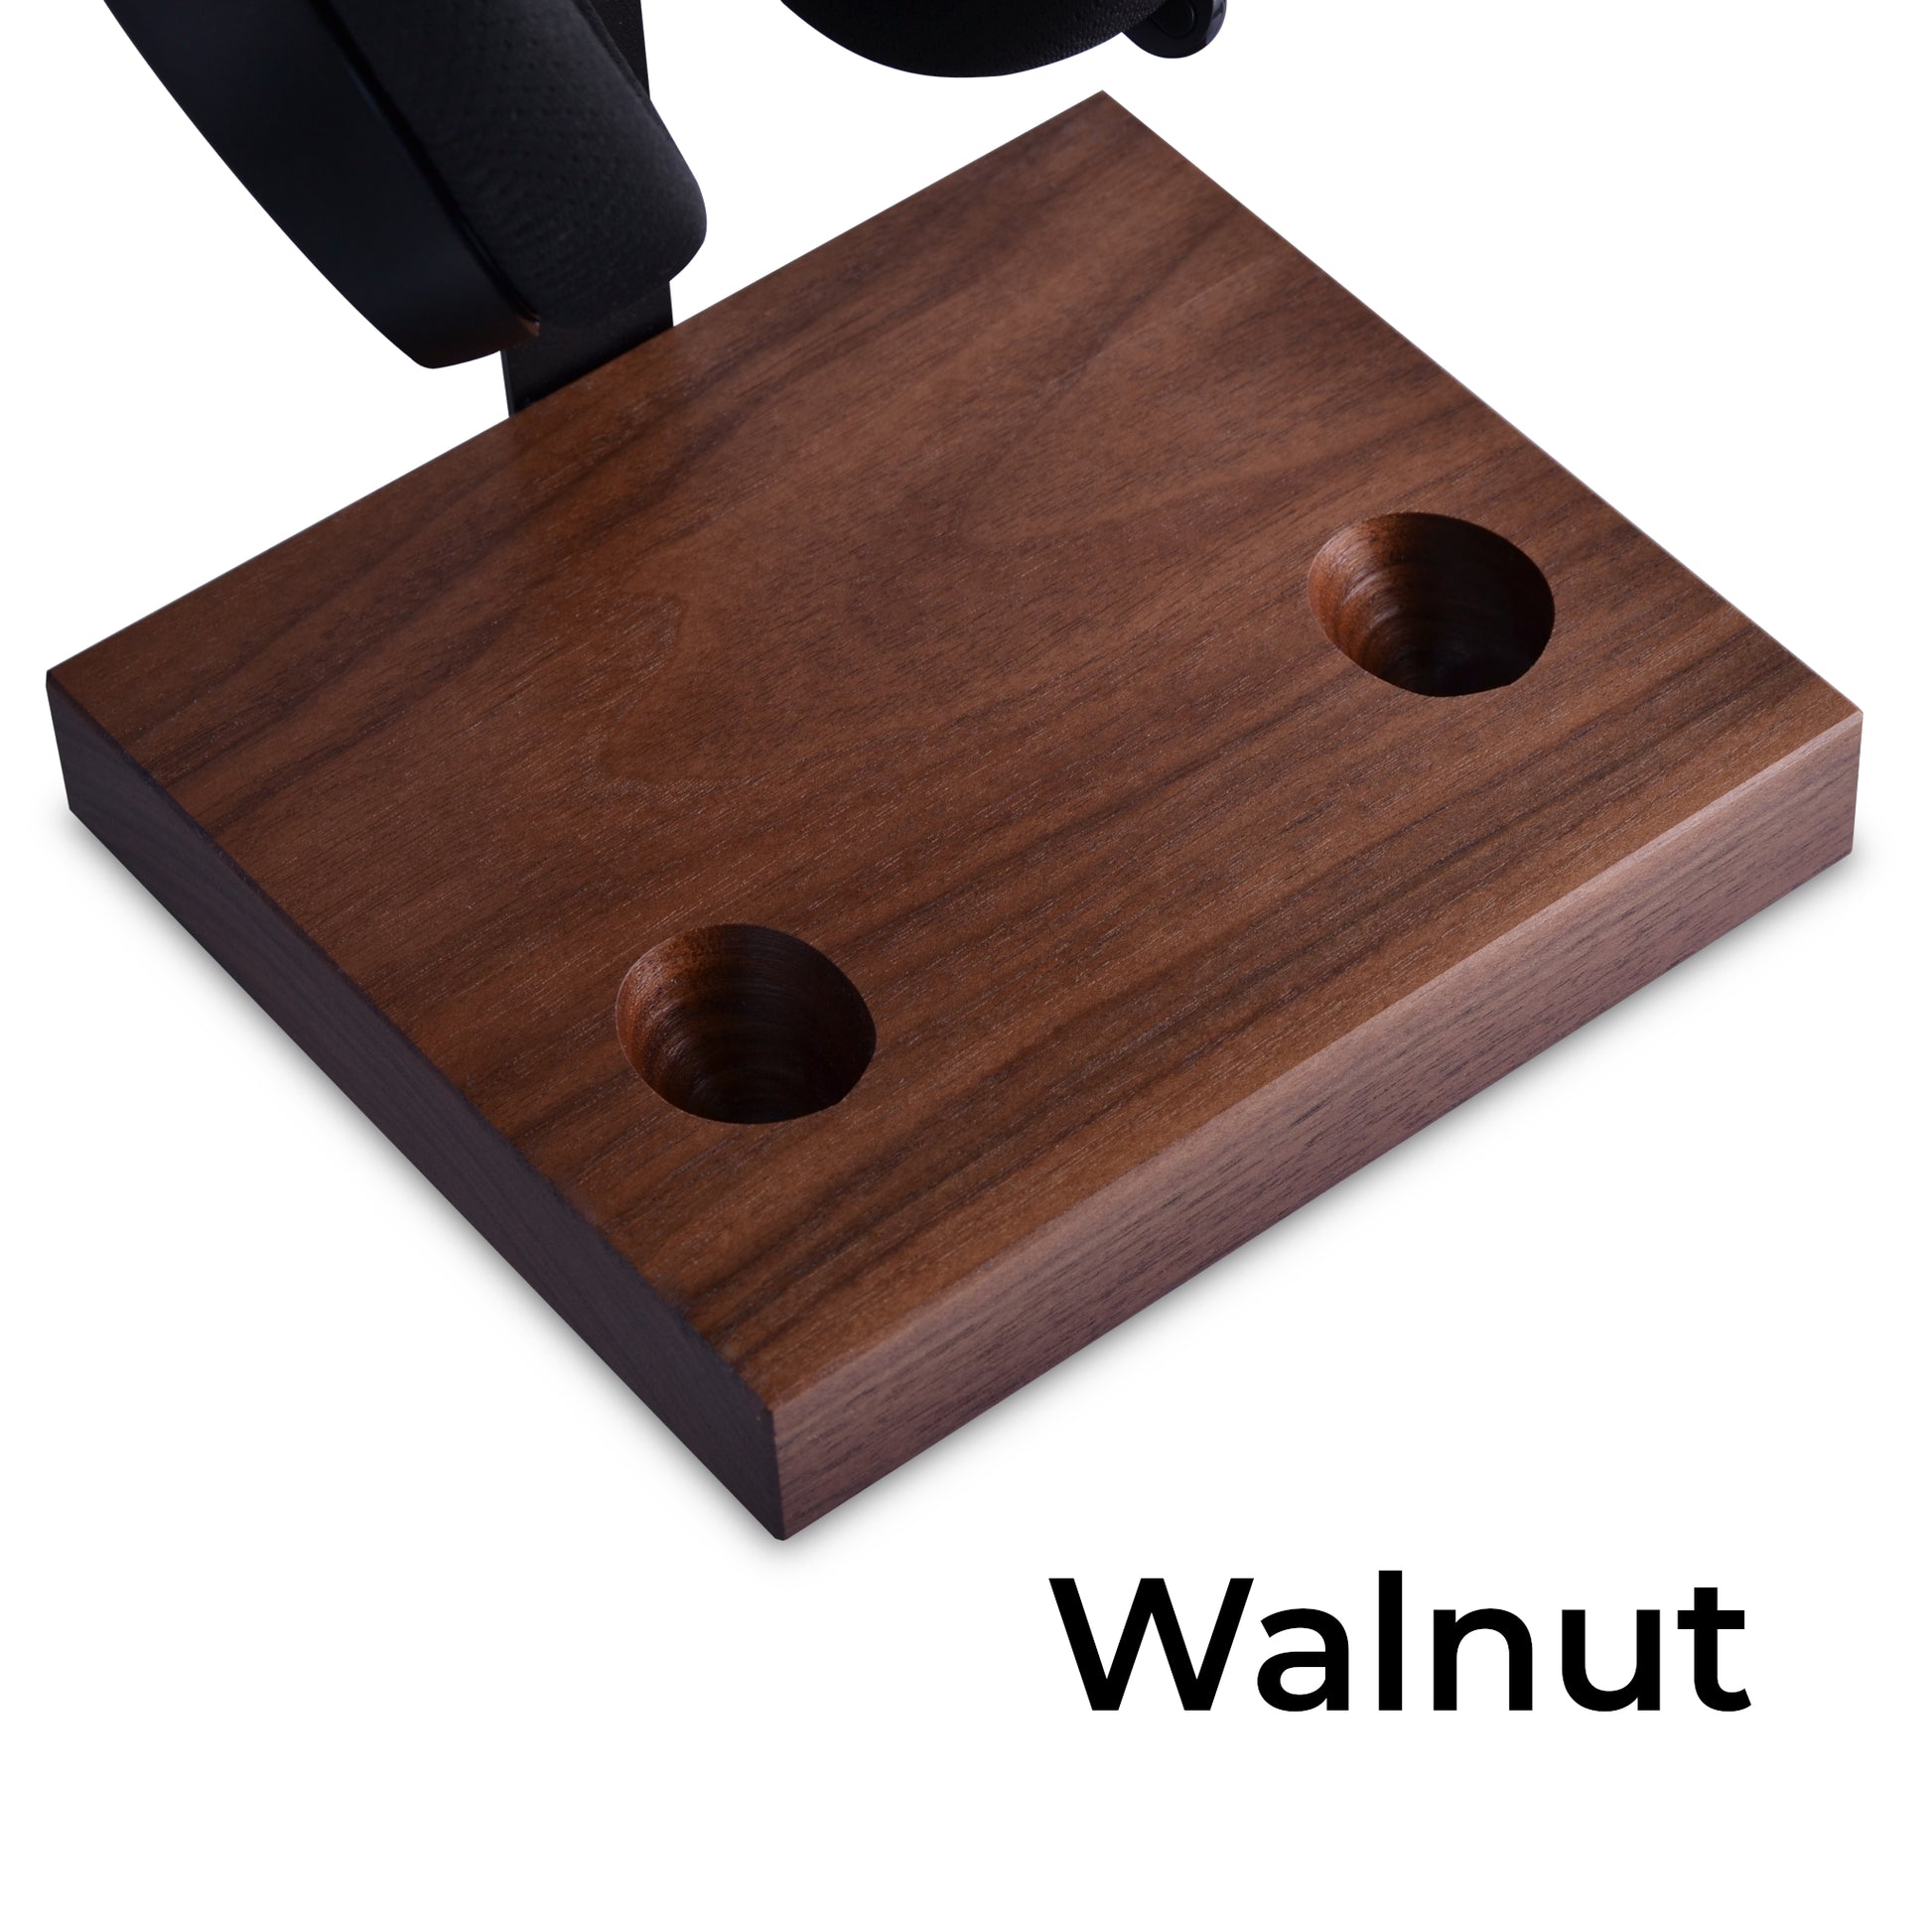 Walnut version of headset and controller stand for Xbox series X|S Controller